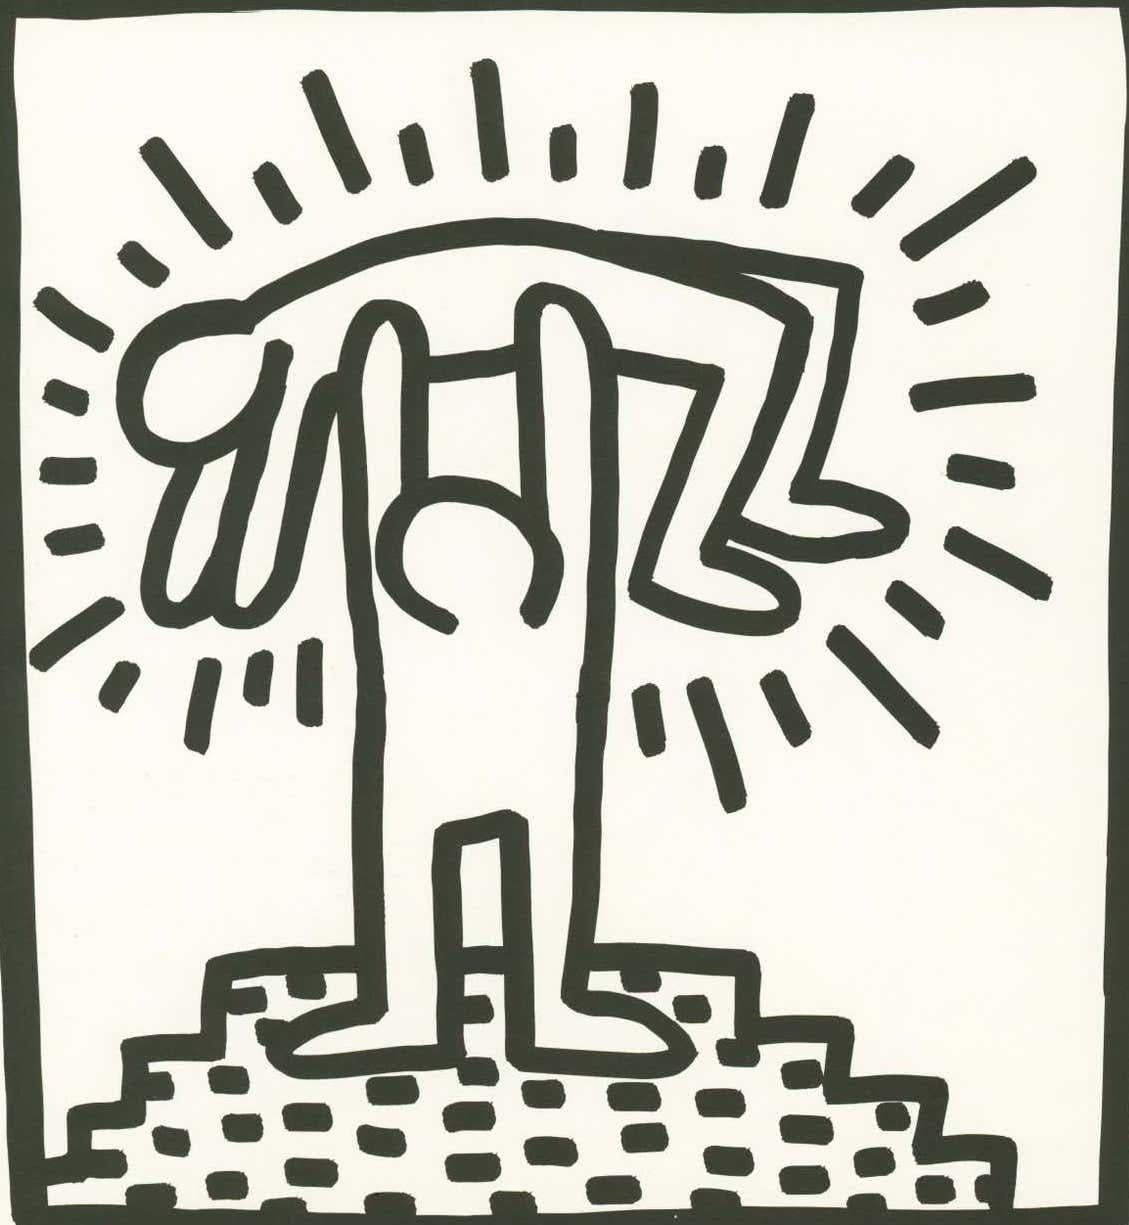 Keith Haring (untitled) Dolphin lithograph 1982:

Double-sided lithographic sheet published by Tony Shafrazi Gallery, 1982 from the seminal spiral bound, early monograph showcasing Haring's work. 

Offset lithograph; 9 x 9 inches.
Very good overall